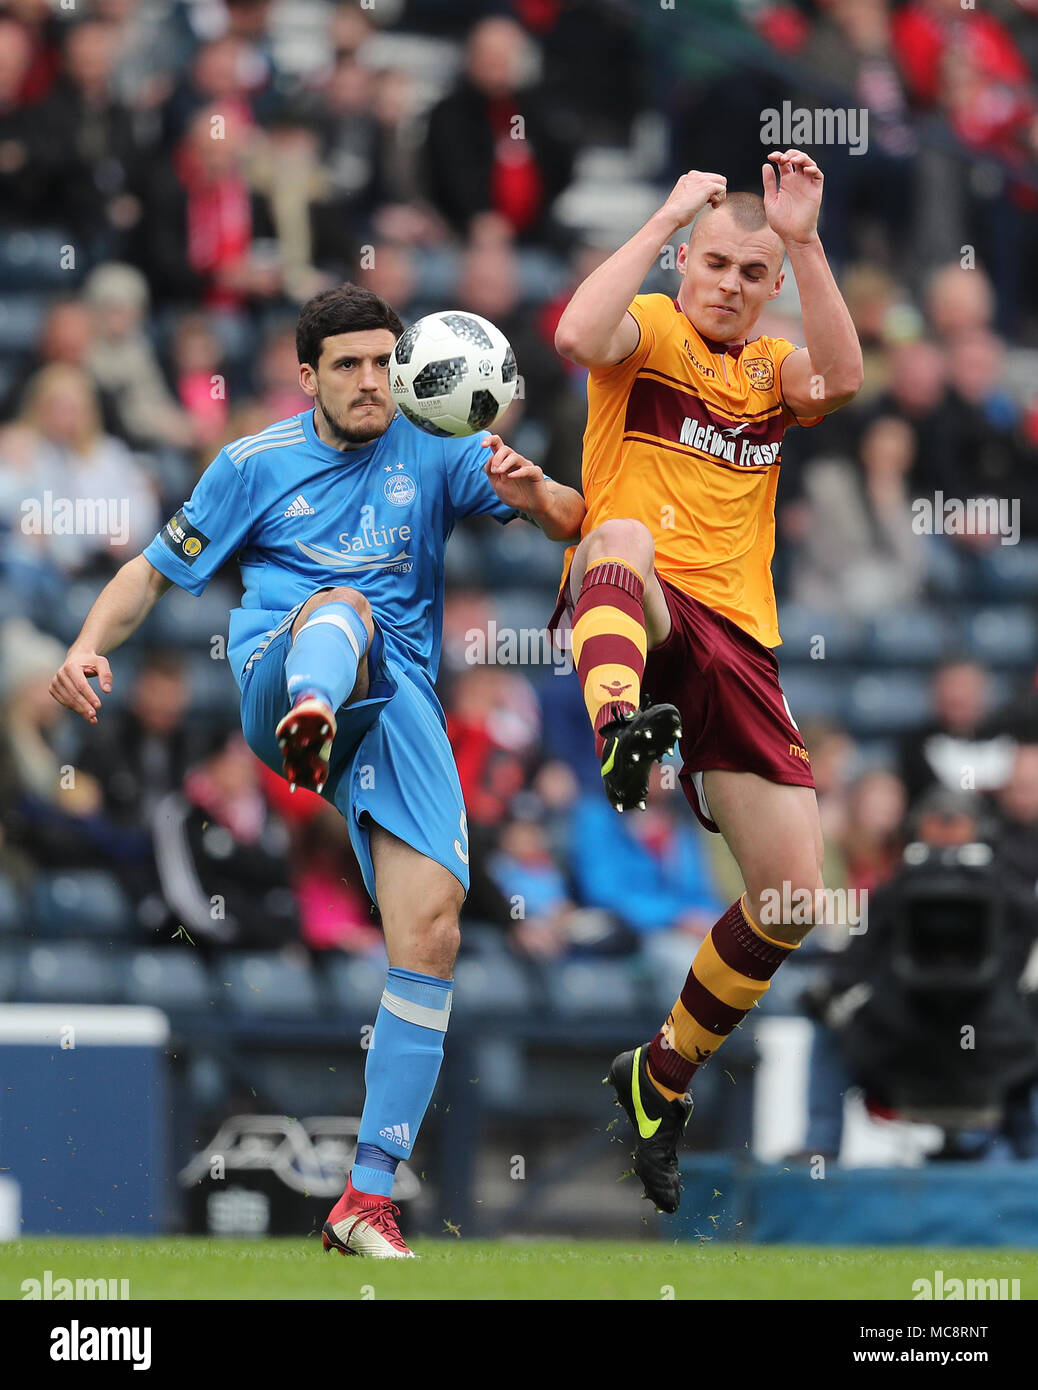 Motherwells Liam Grimshaw challenges Aberdeens Anthony O'Connor during the William Hill Scottish Cup semi final match at Hampden Park, Glasgow. Stock Photo